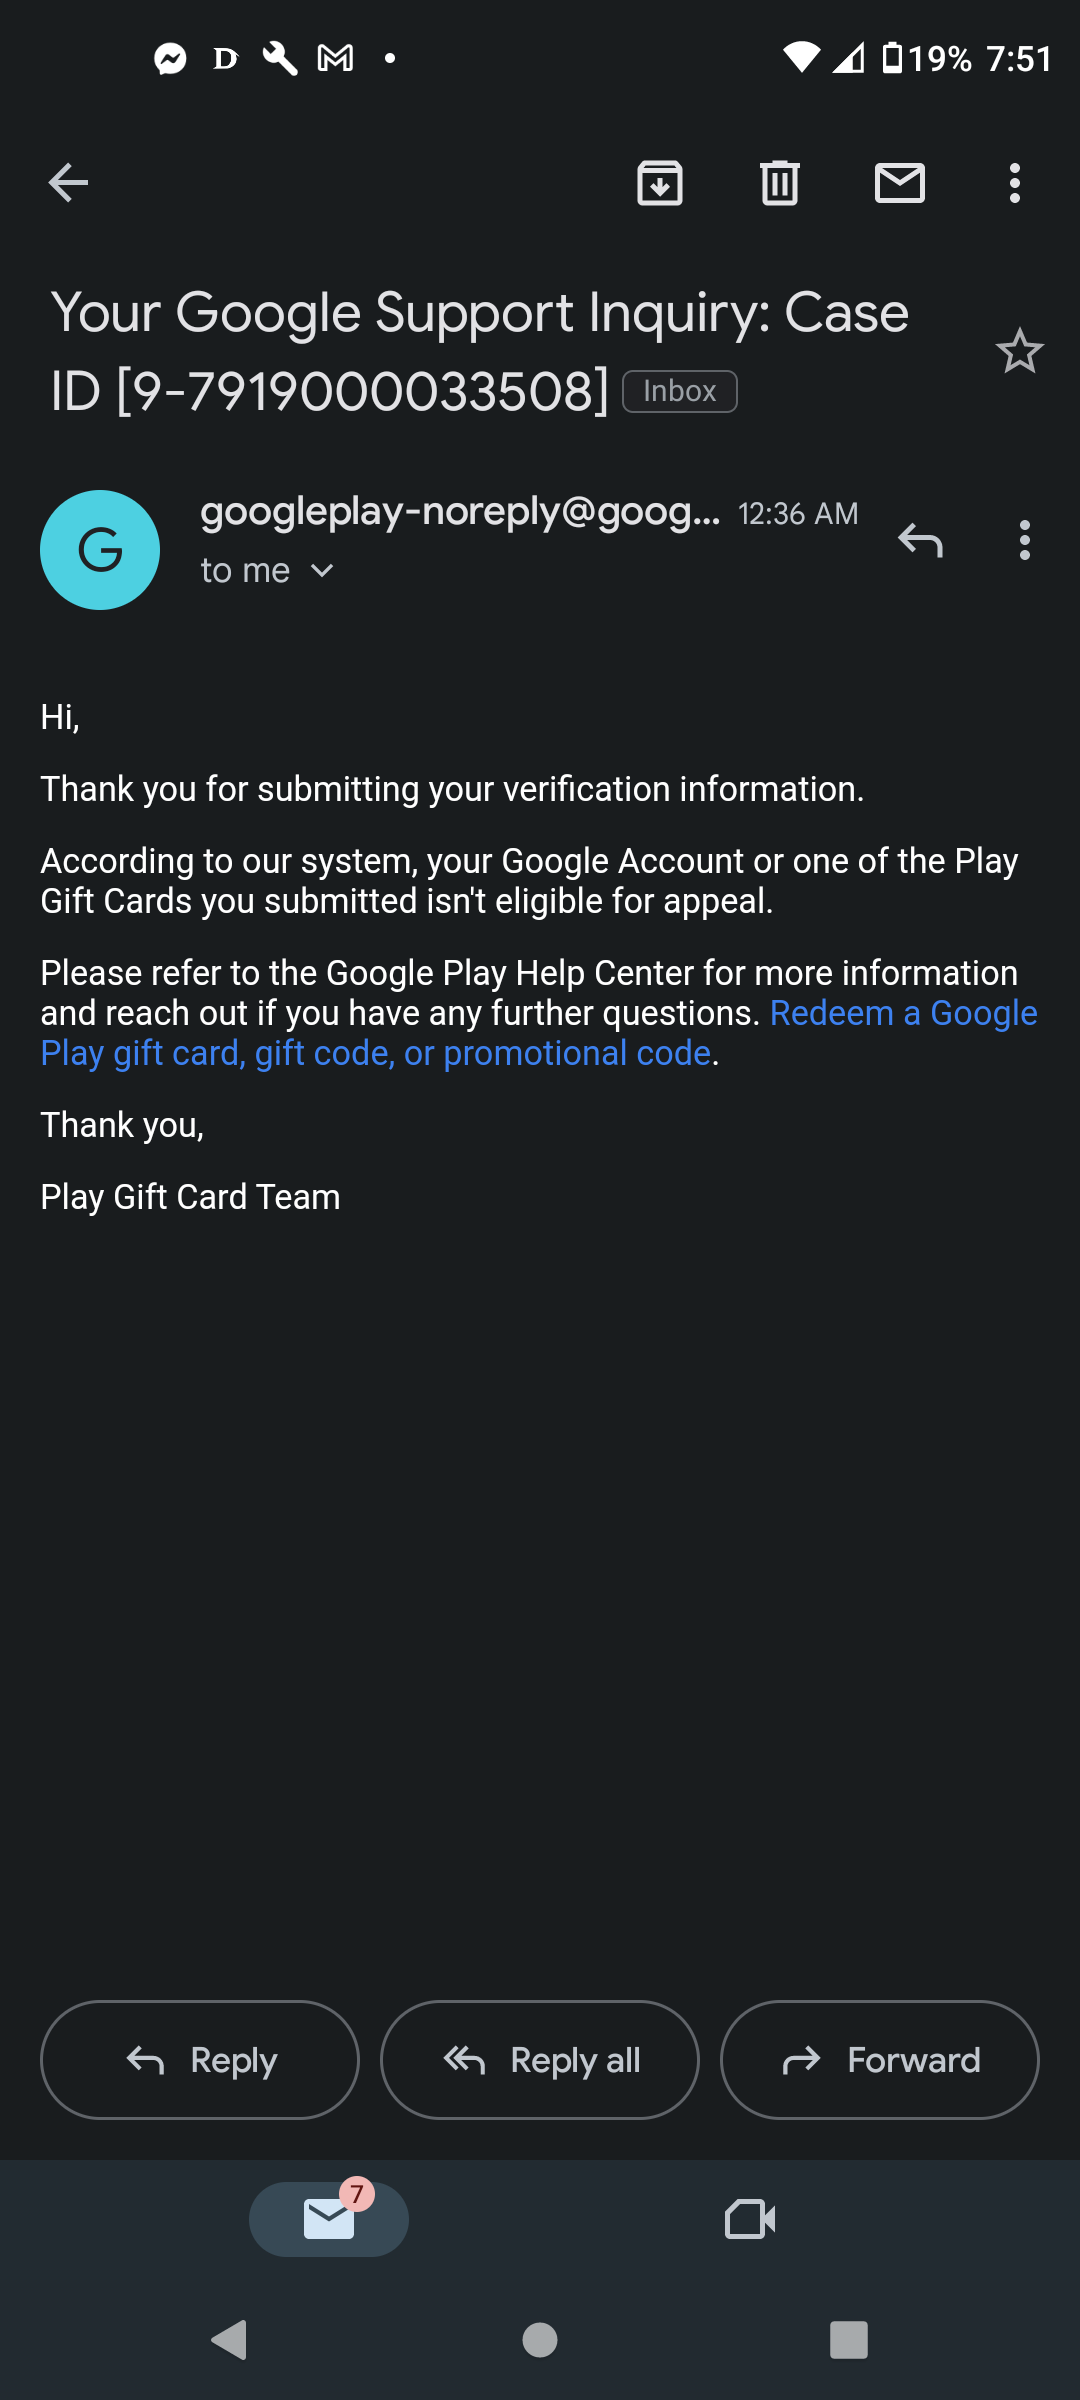 Images Of Google Play Gift Cards Show Up Online In $10 And $25 Increments